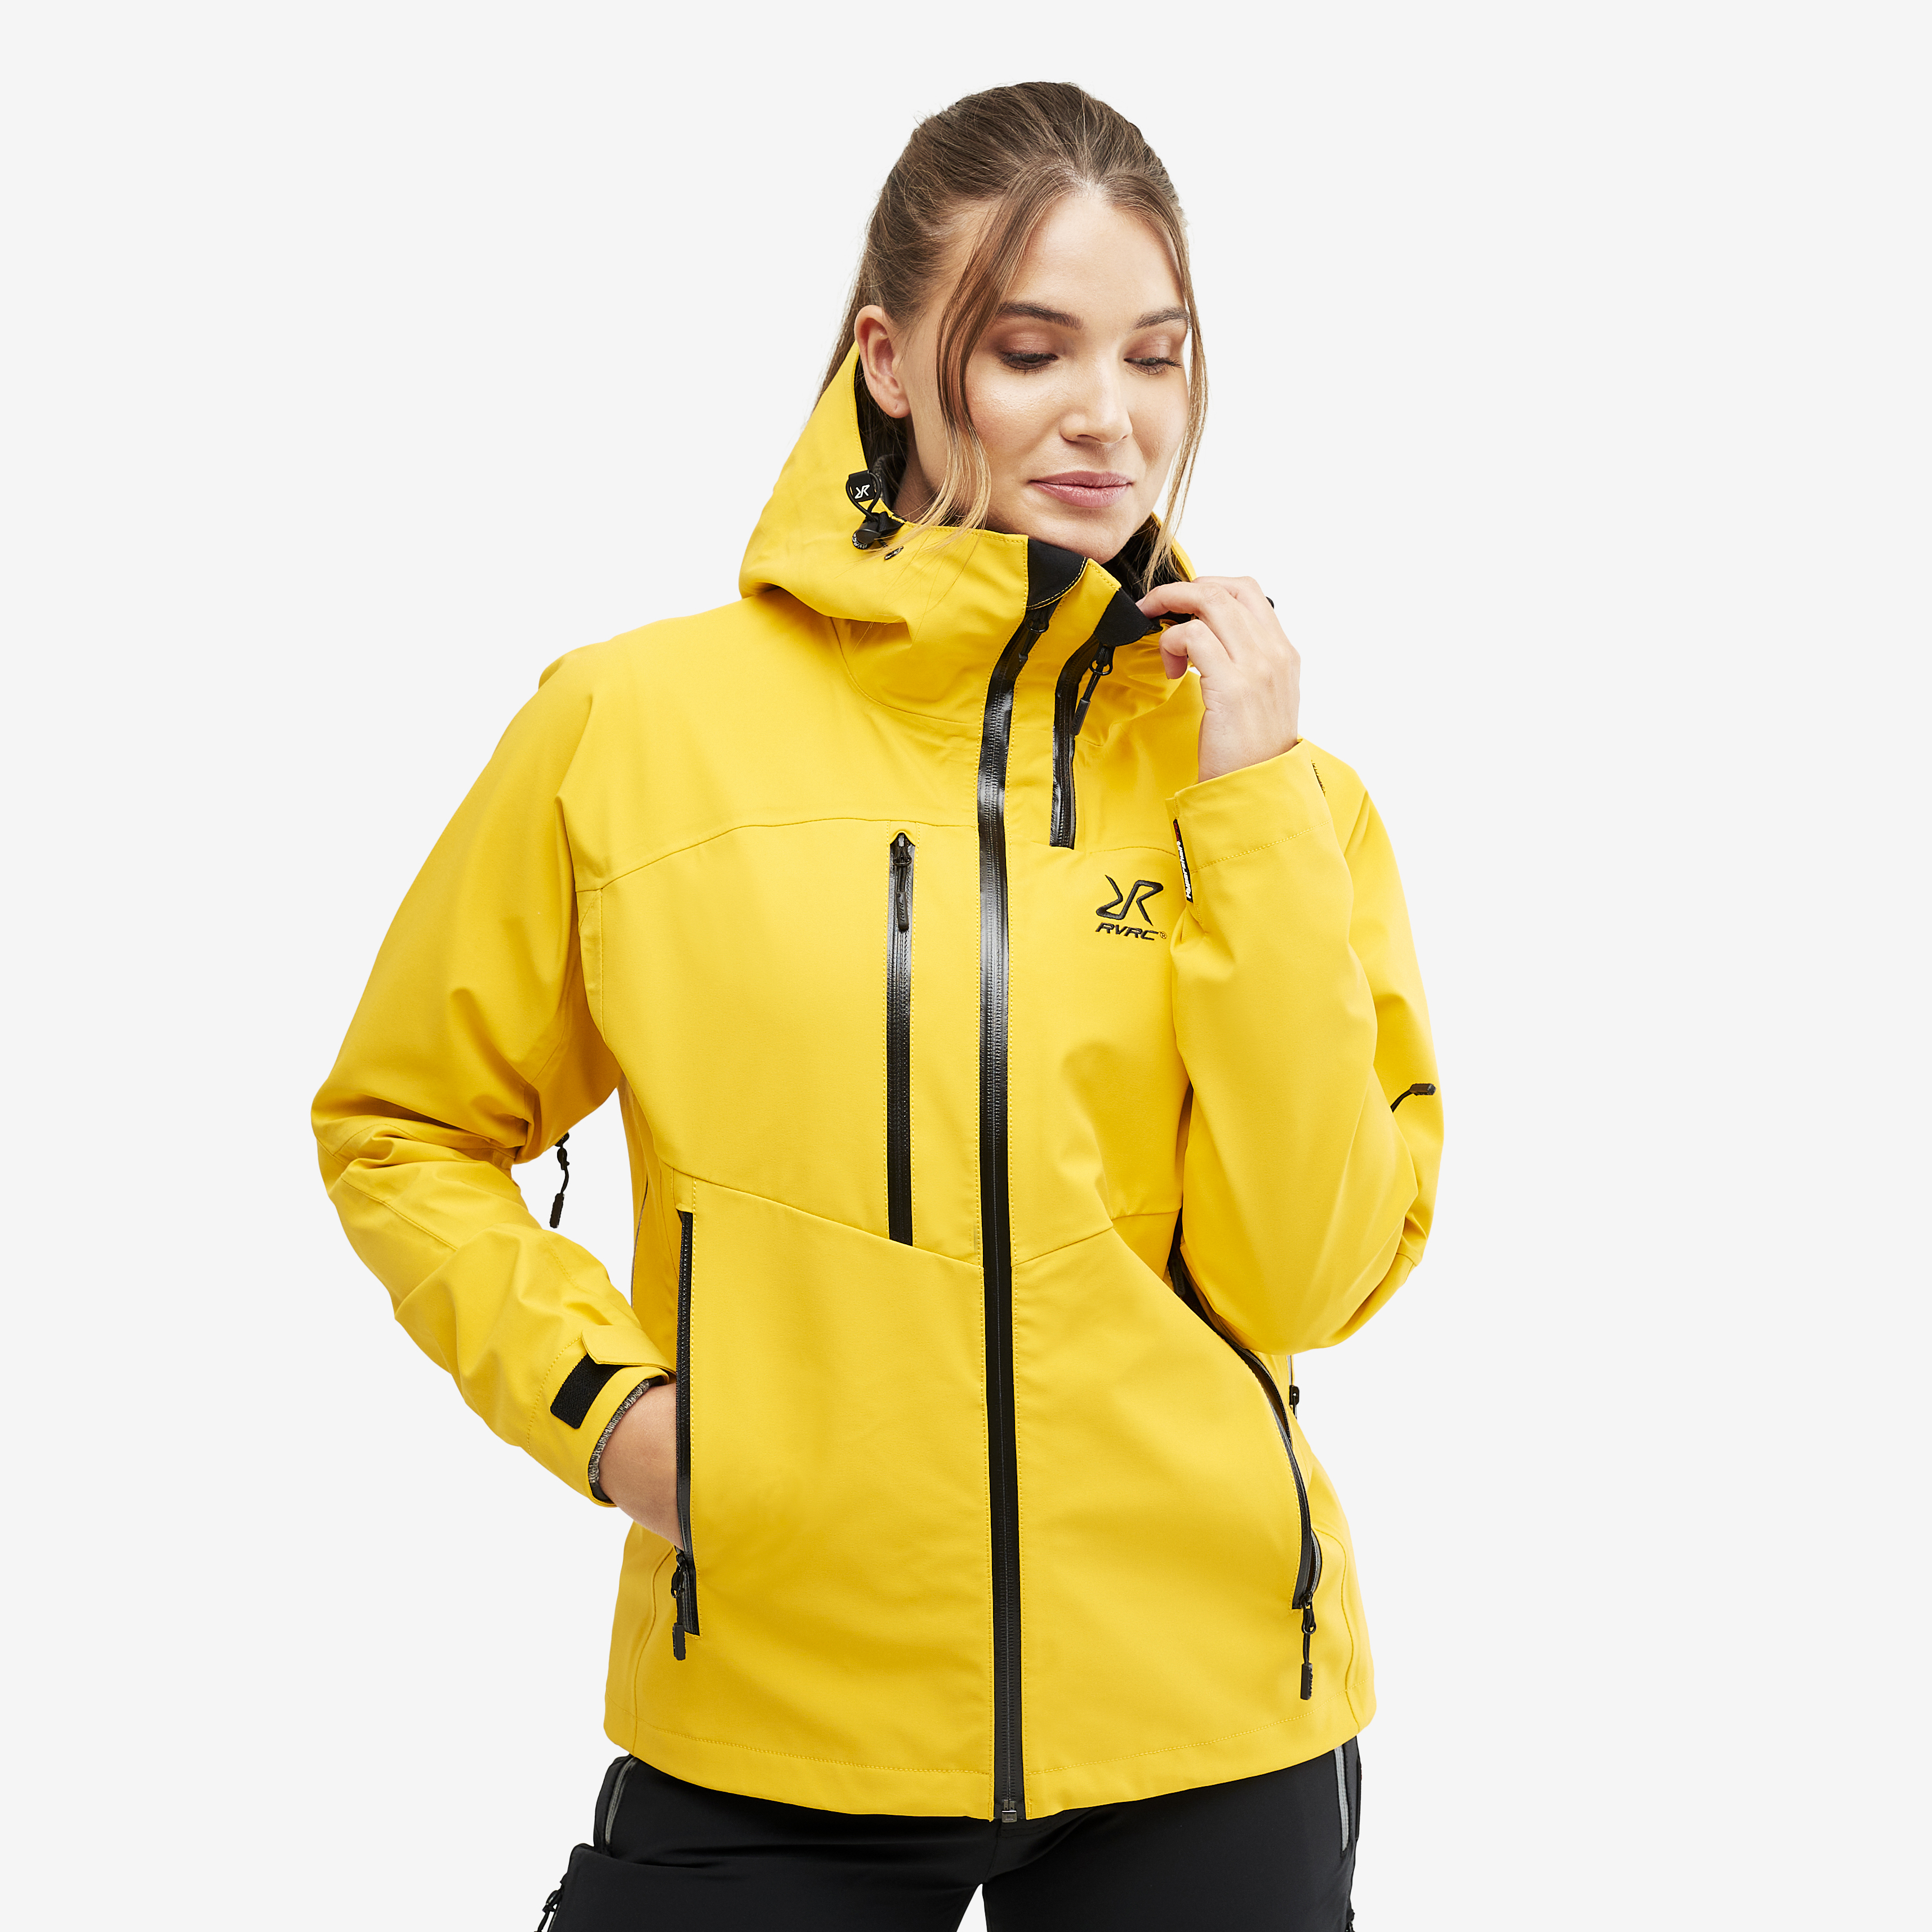 Cyclone Rescue Jacket 2.0 Yellow Femme